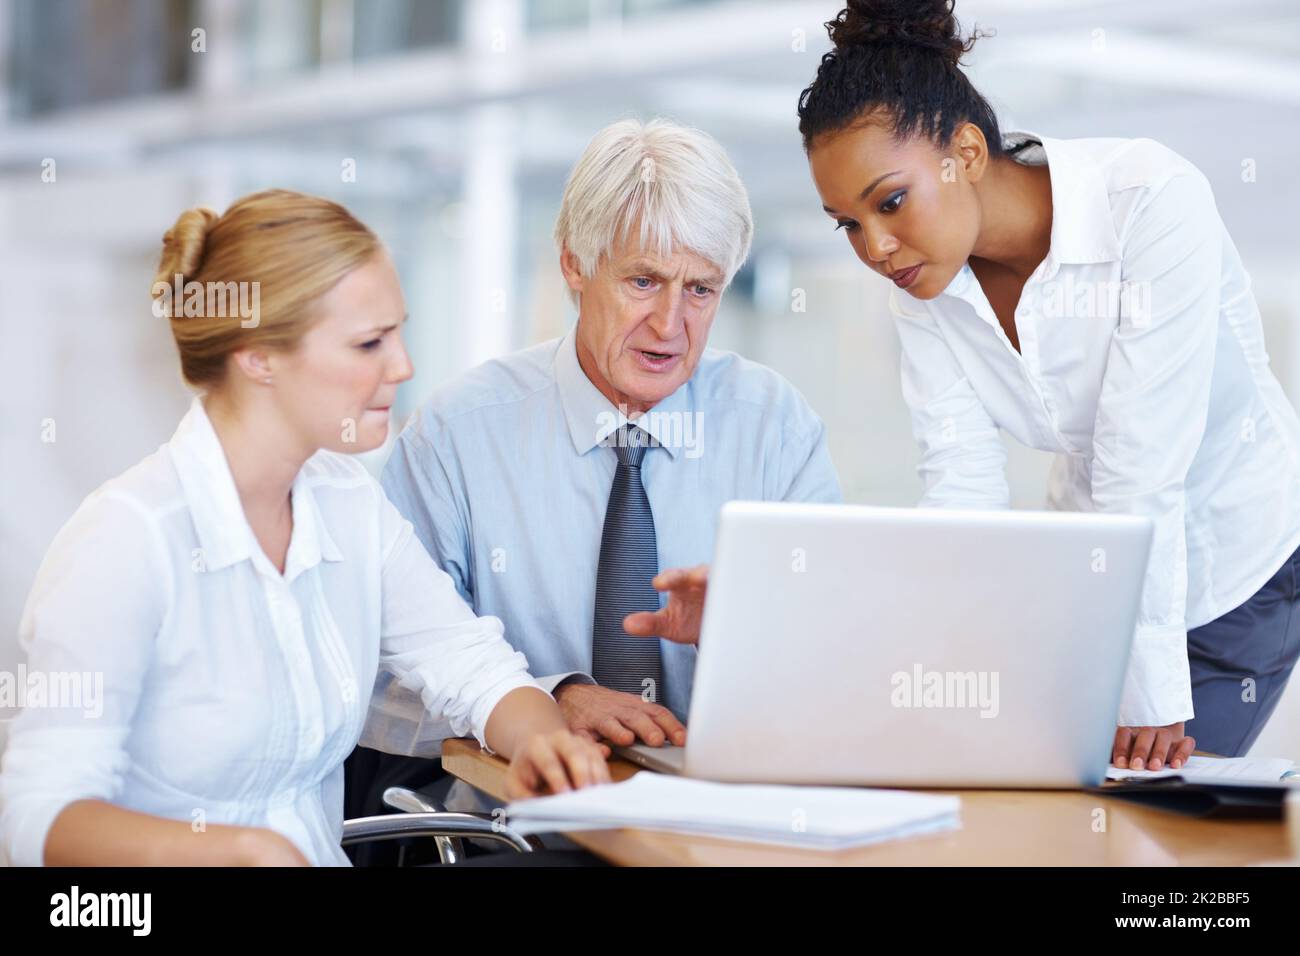 Associates using laptop. Portrait of multi ethnic associates working on laptop together at office. Stock Photo